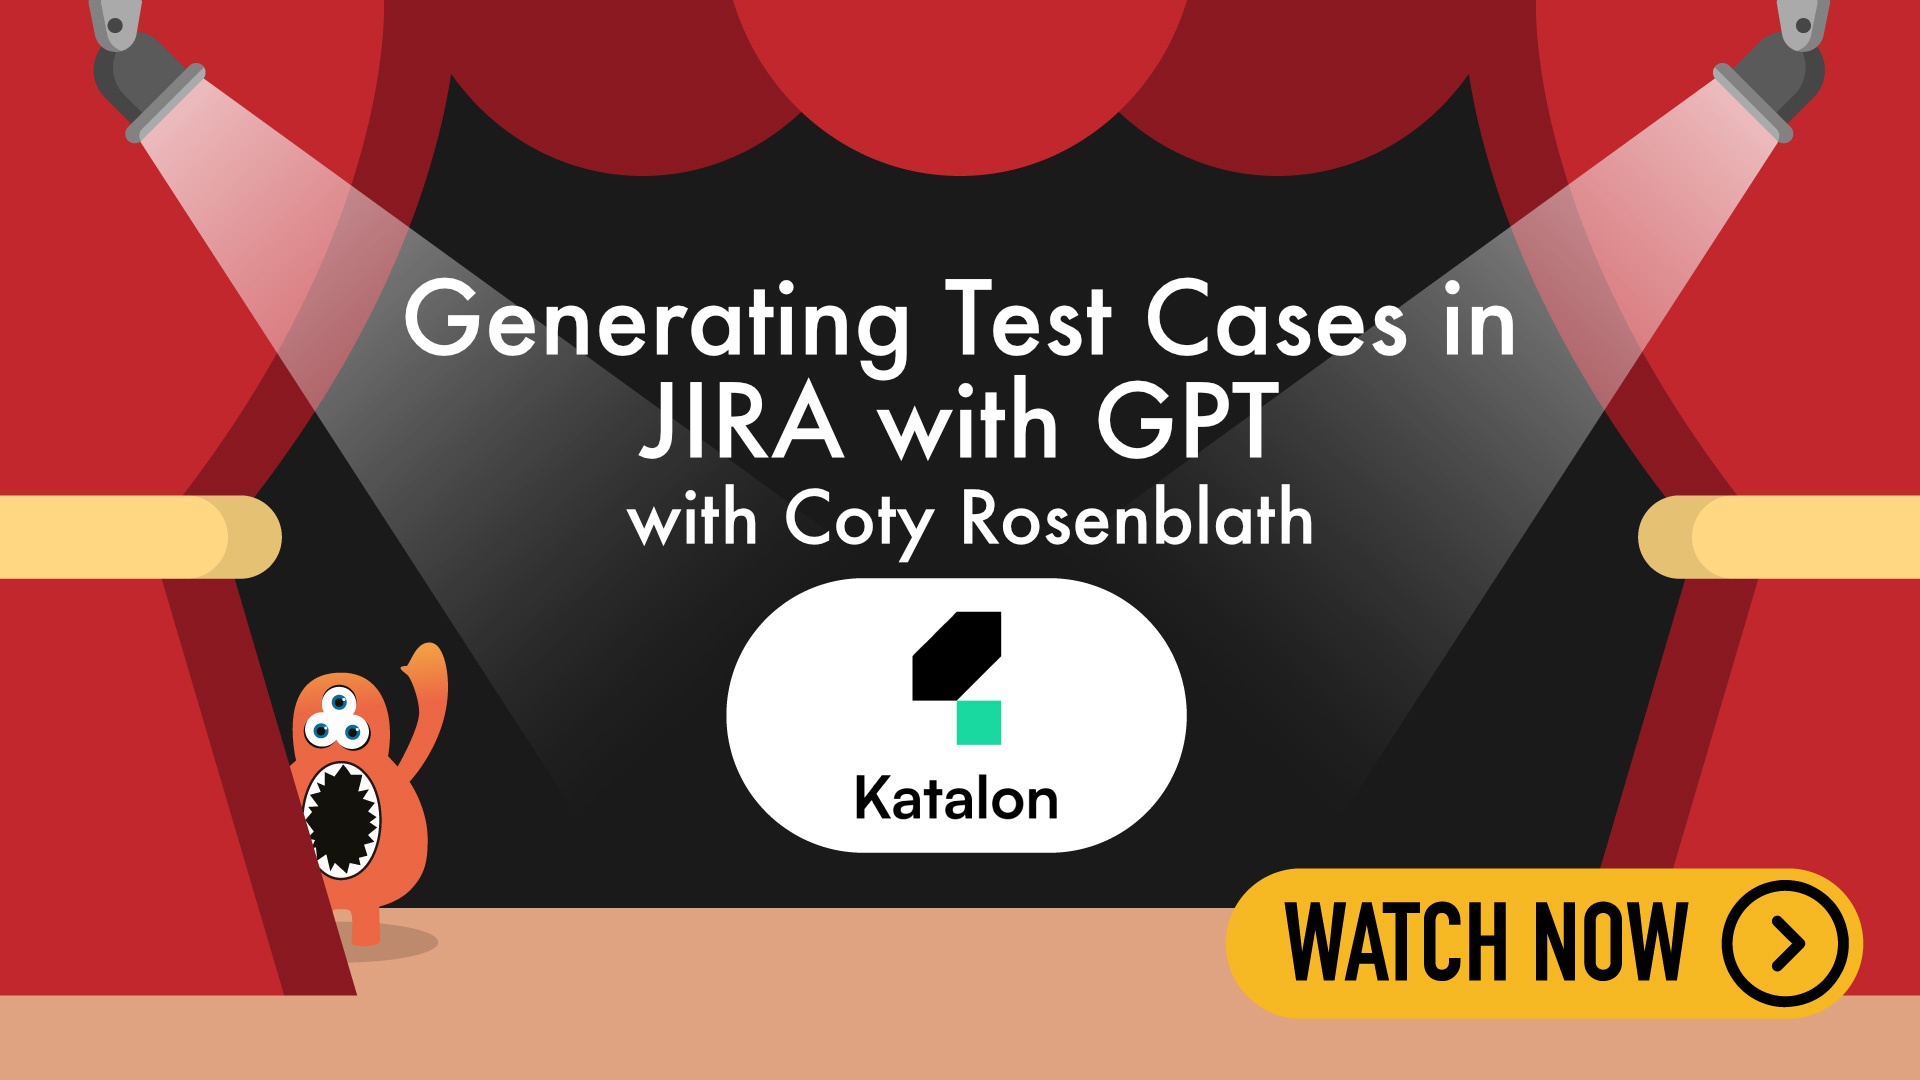 Generating Test Cases in JIRA with GPT with Coty Rosenblath